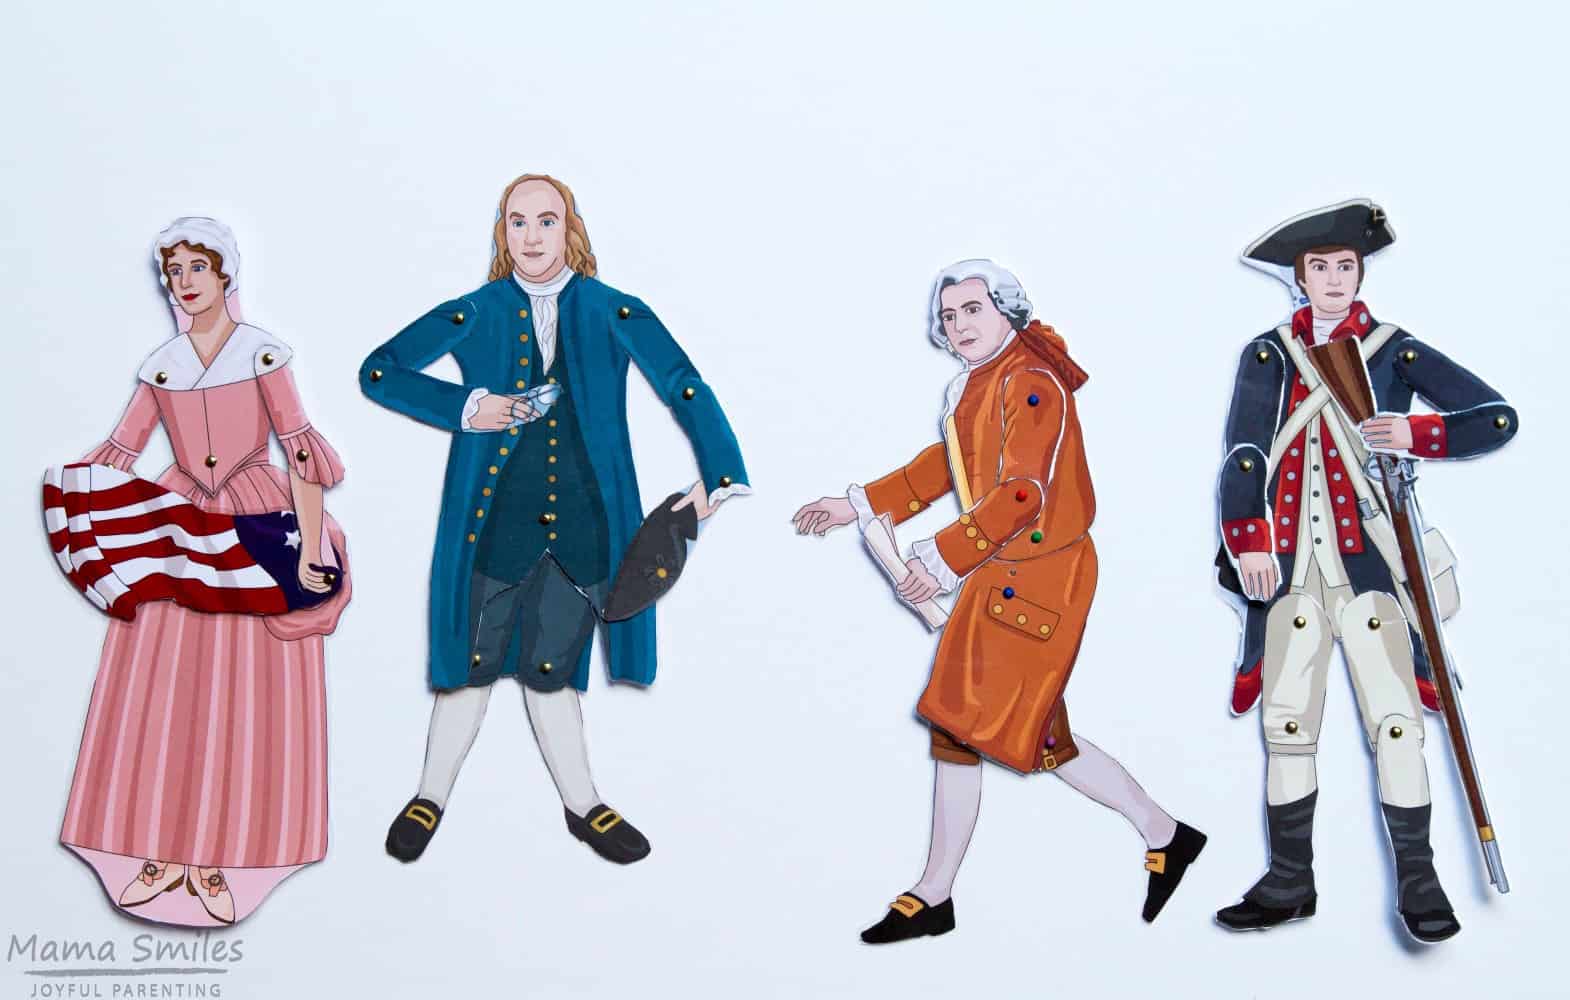 Fun ideas for teaching kids about the American Revolution